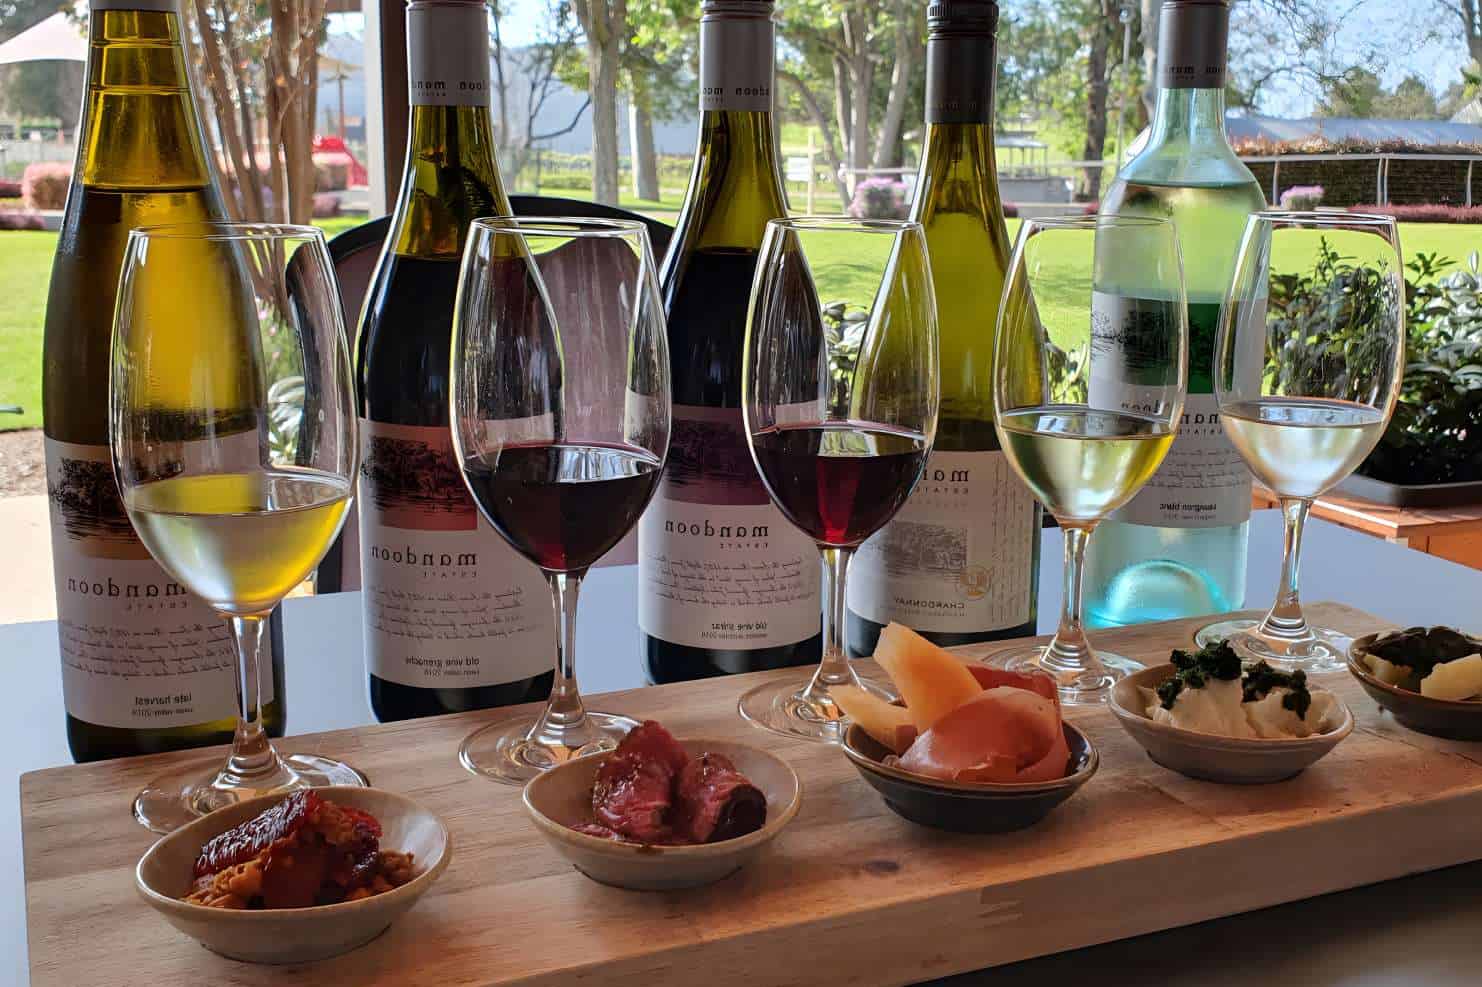 What are the benefits of attending a wine flight event